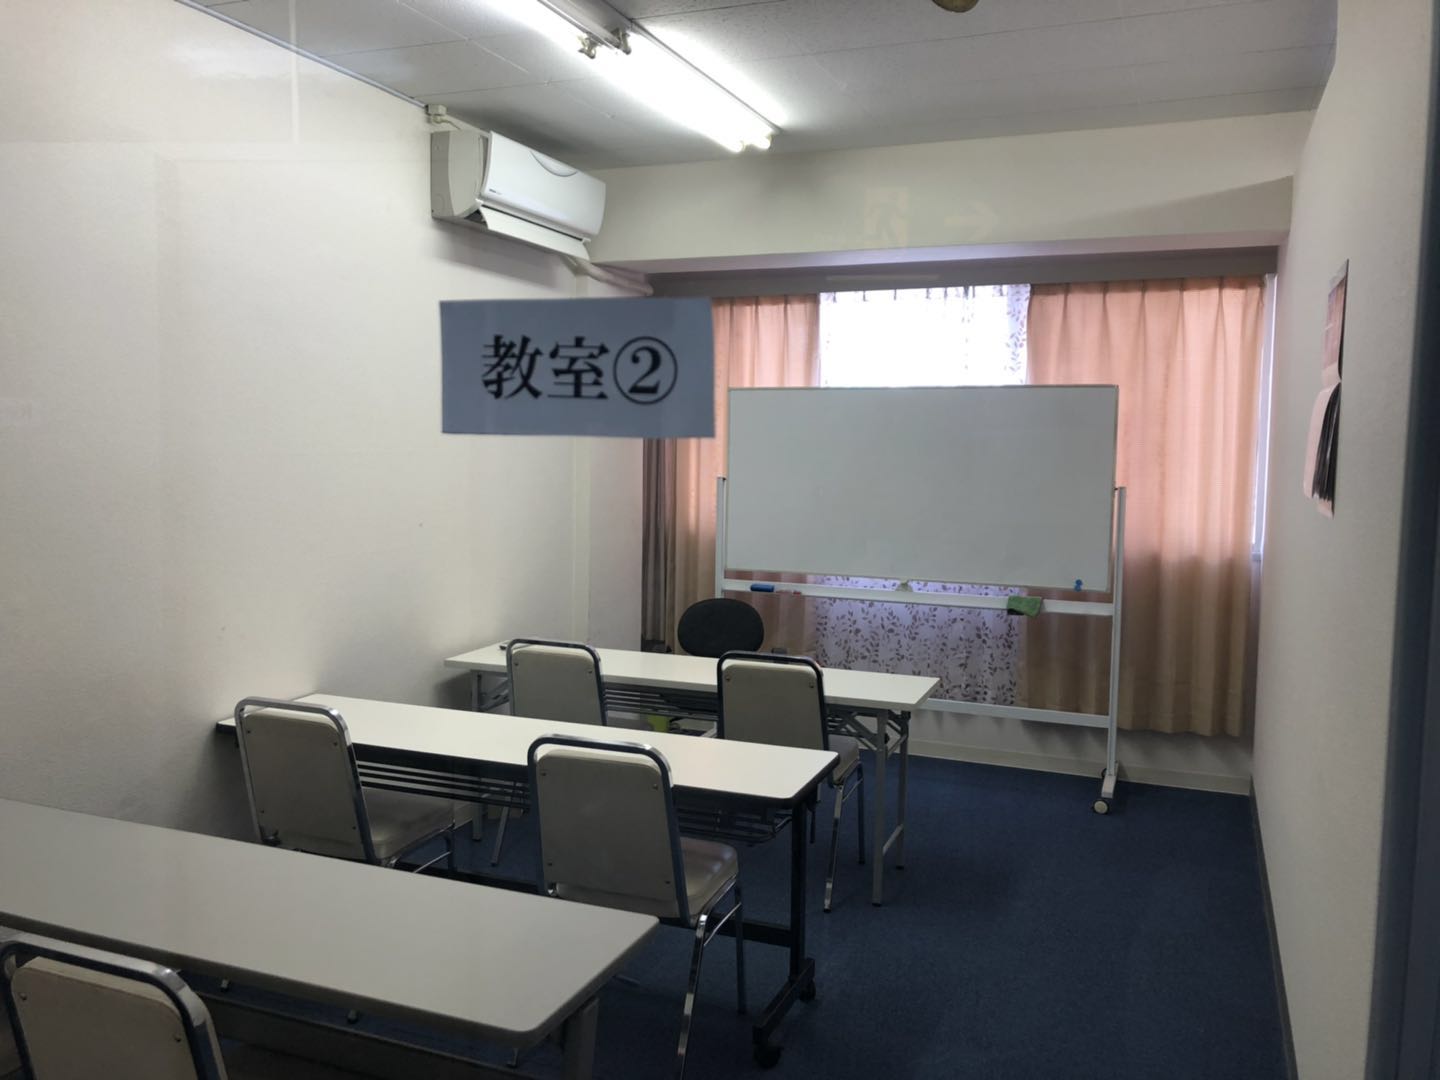 Training Room 2 (picture)